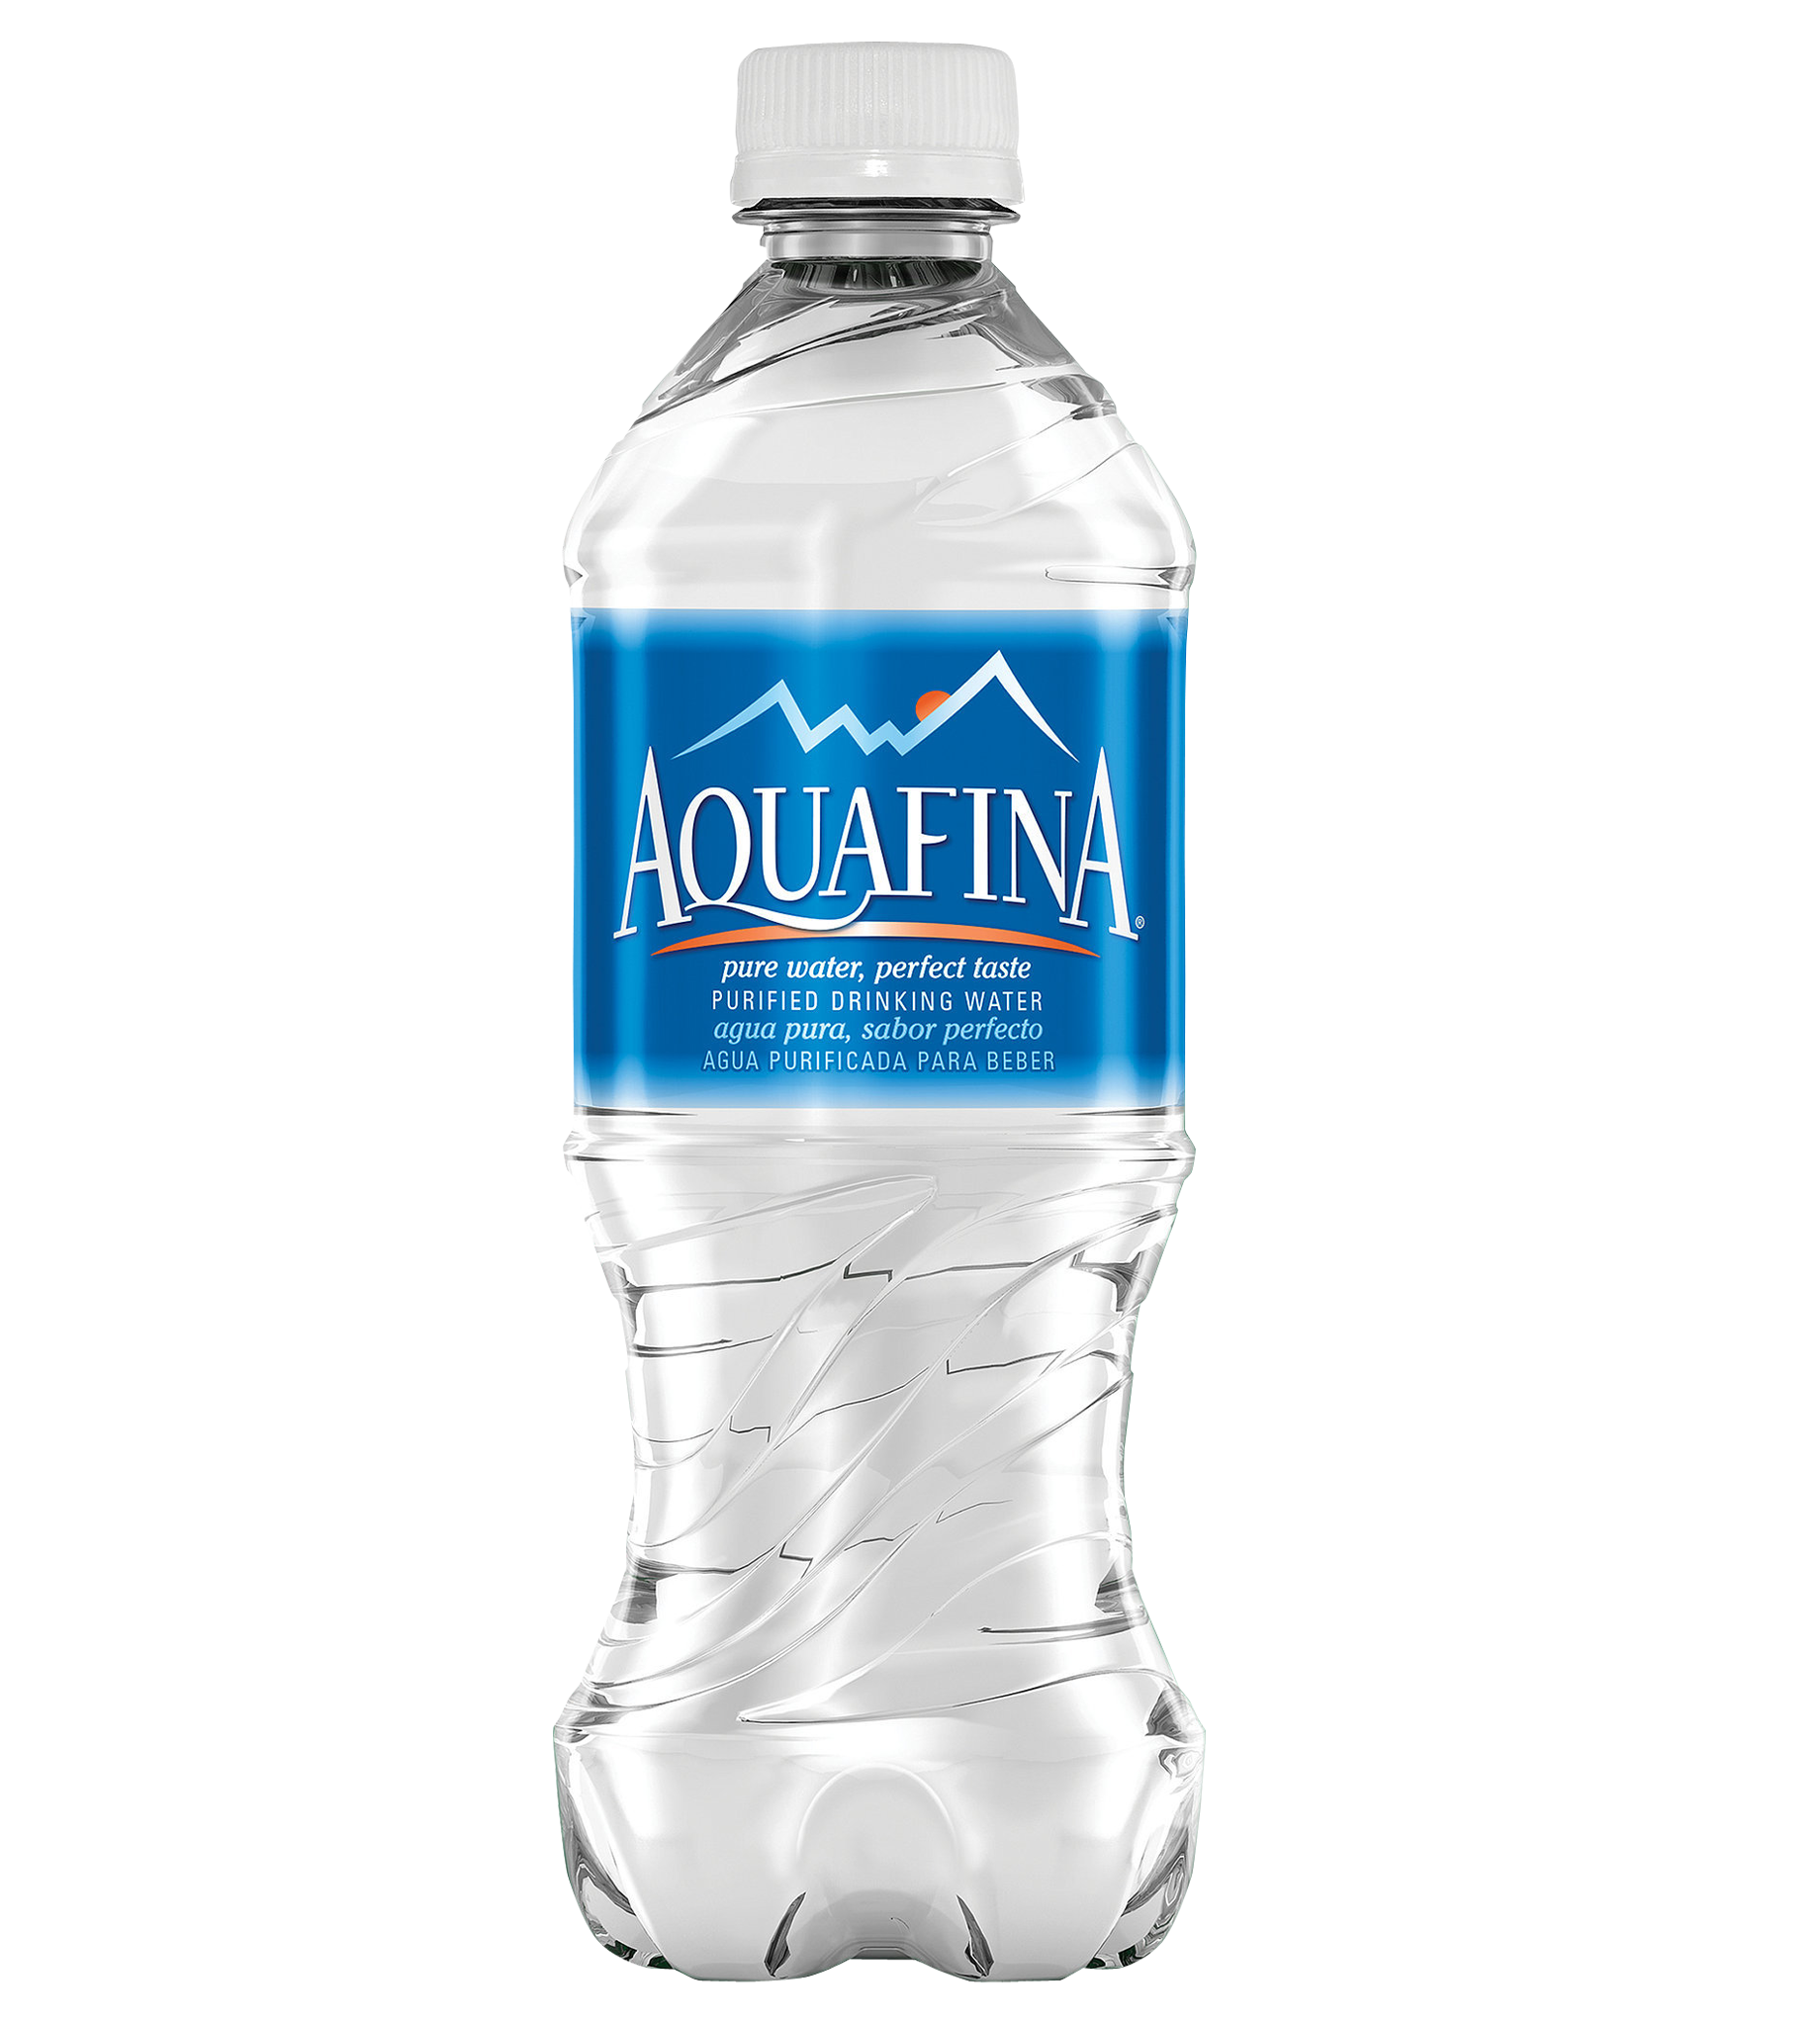 Water Bottle Free Photo PNG Image